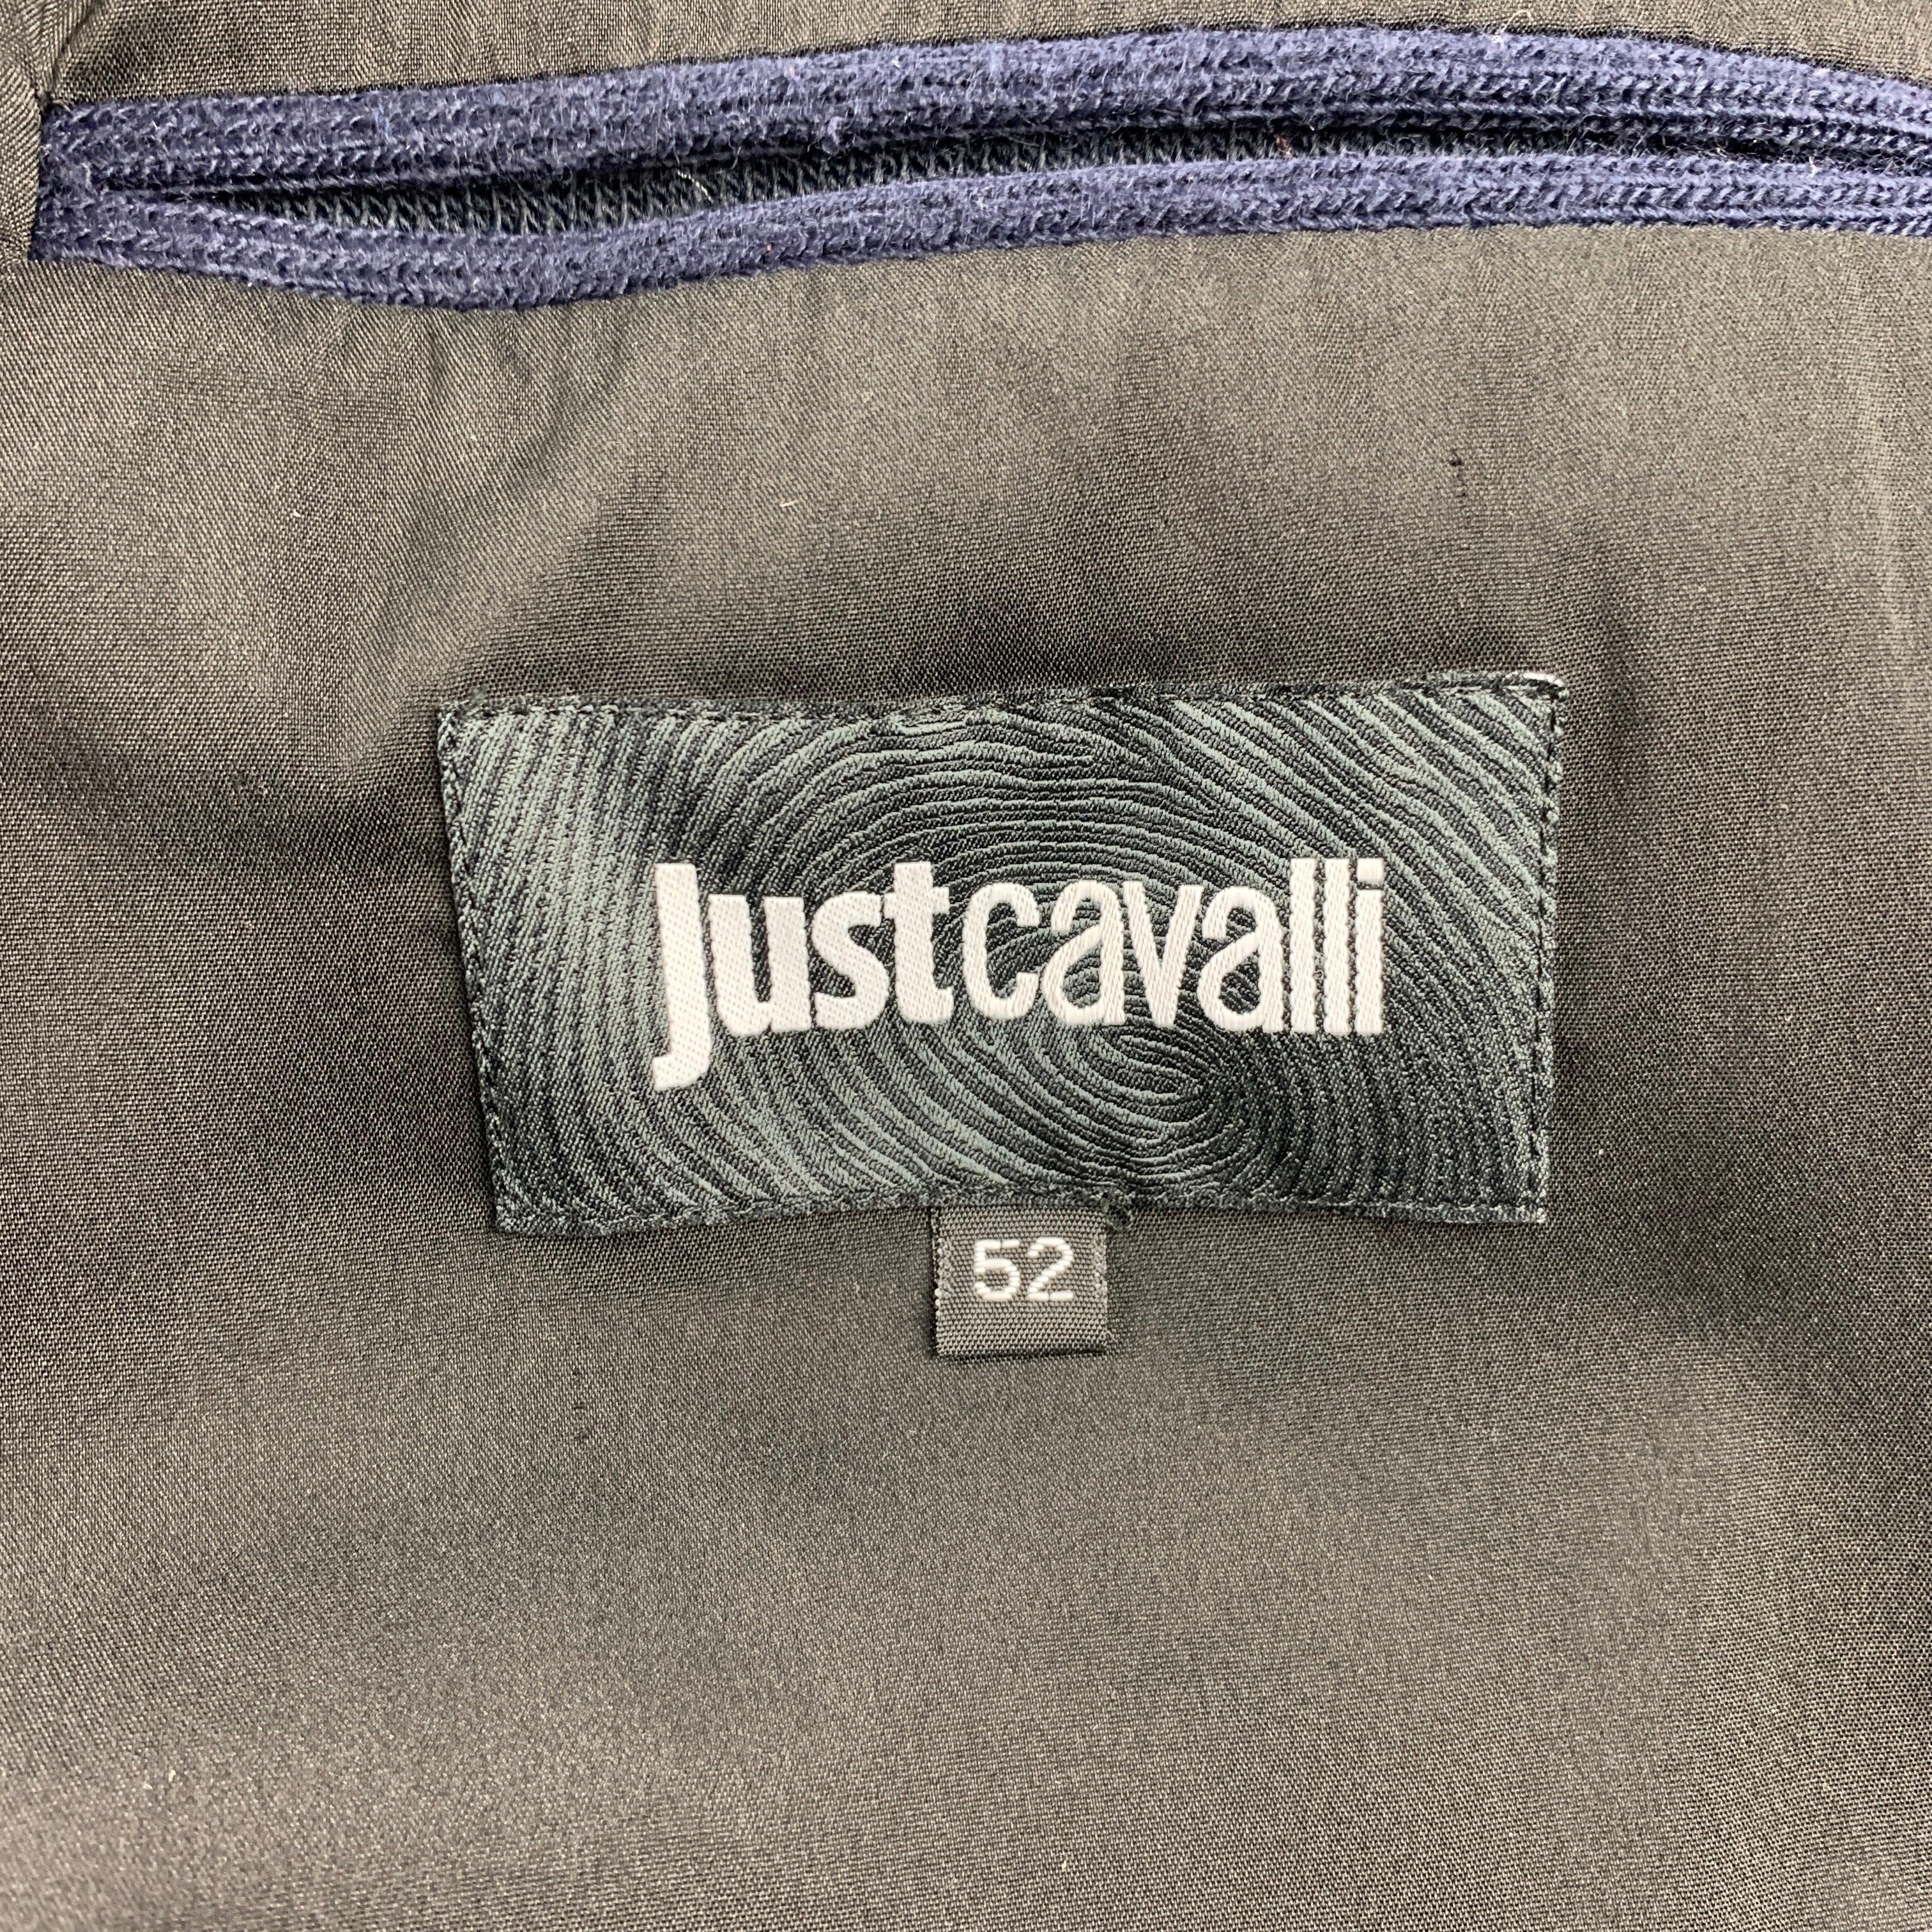 JUST CAVALLI Size L Navy & Grey Color Block Knit Jacket For Sale 1